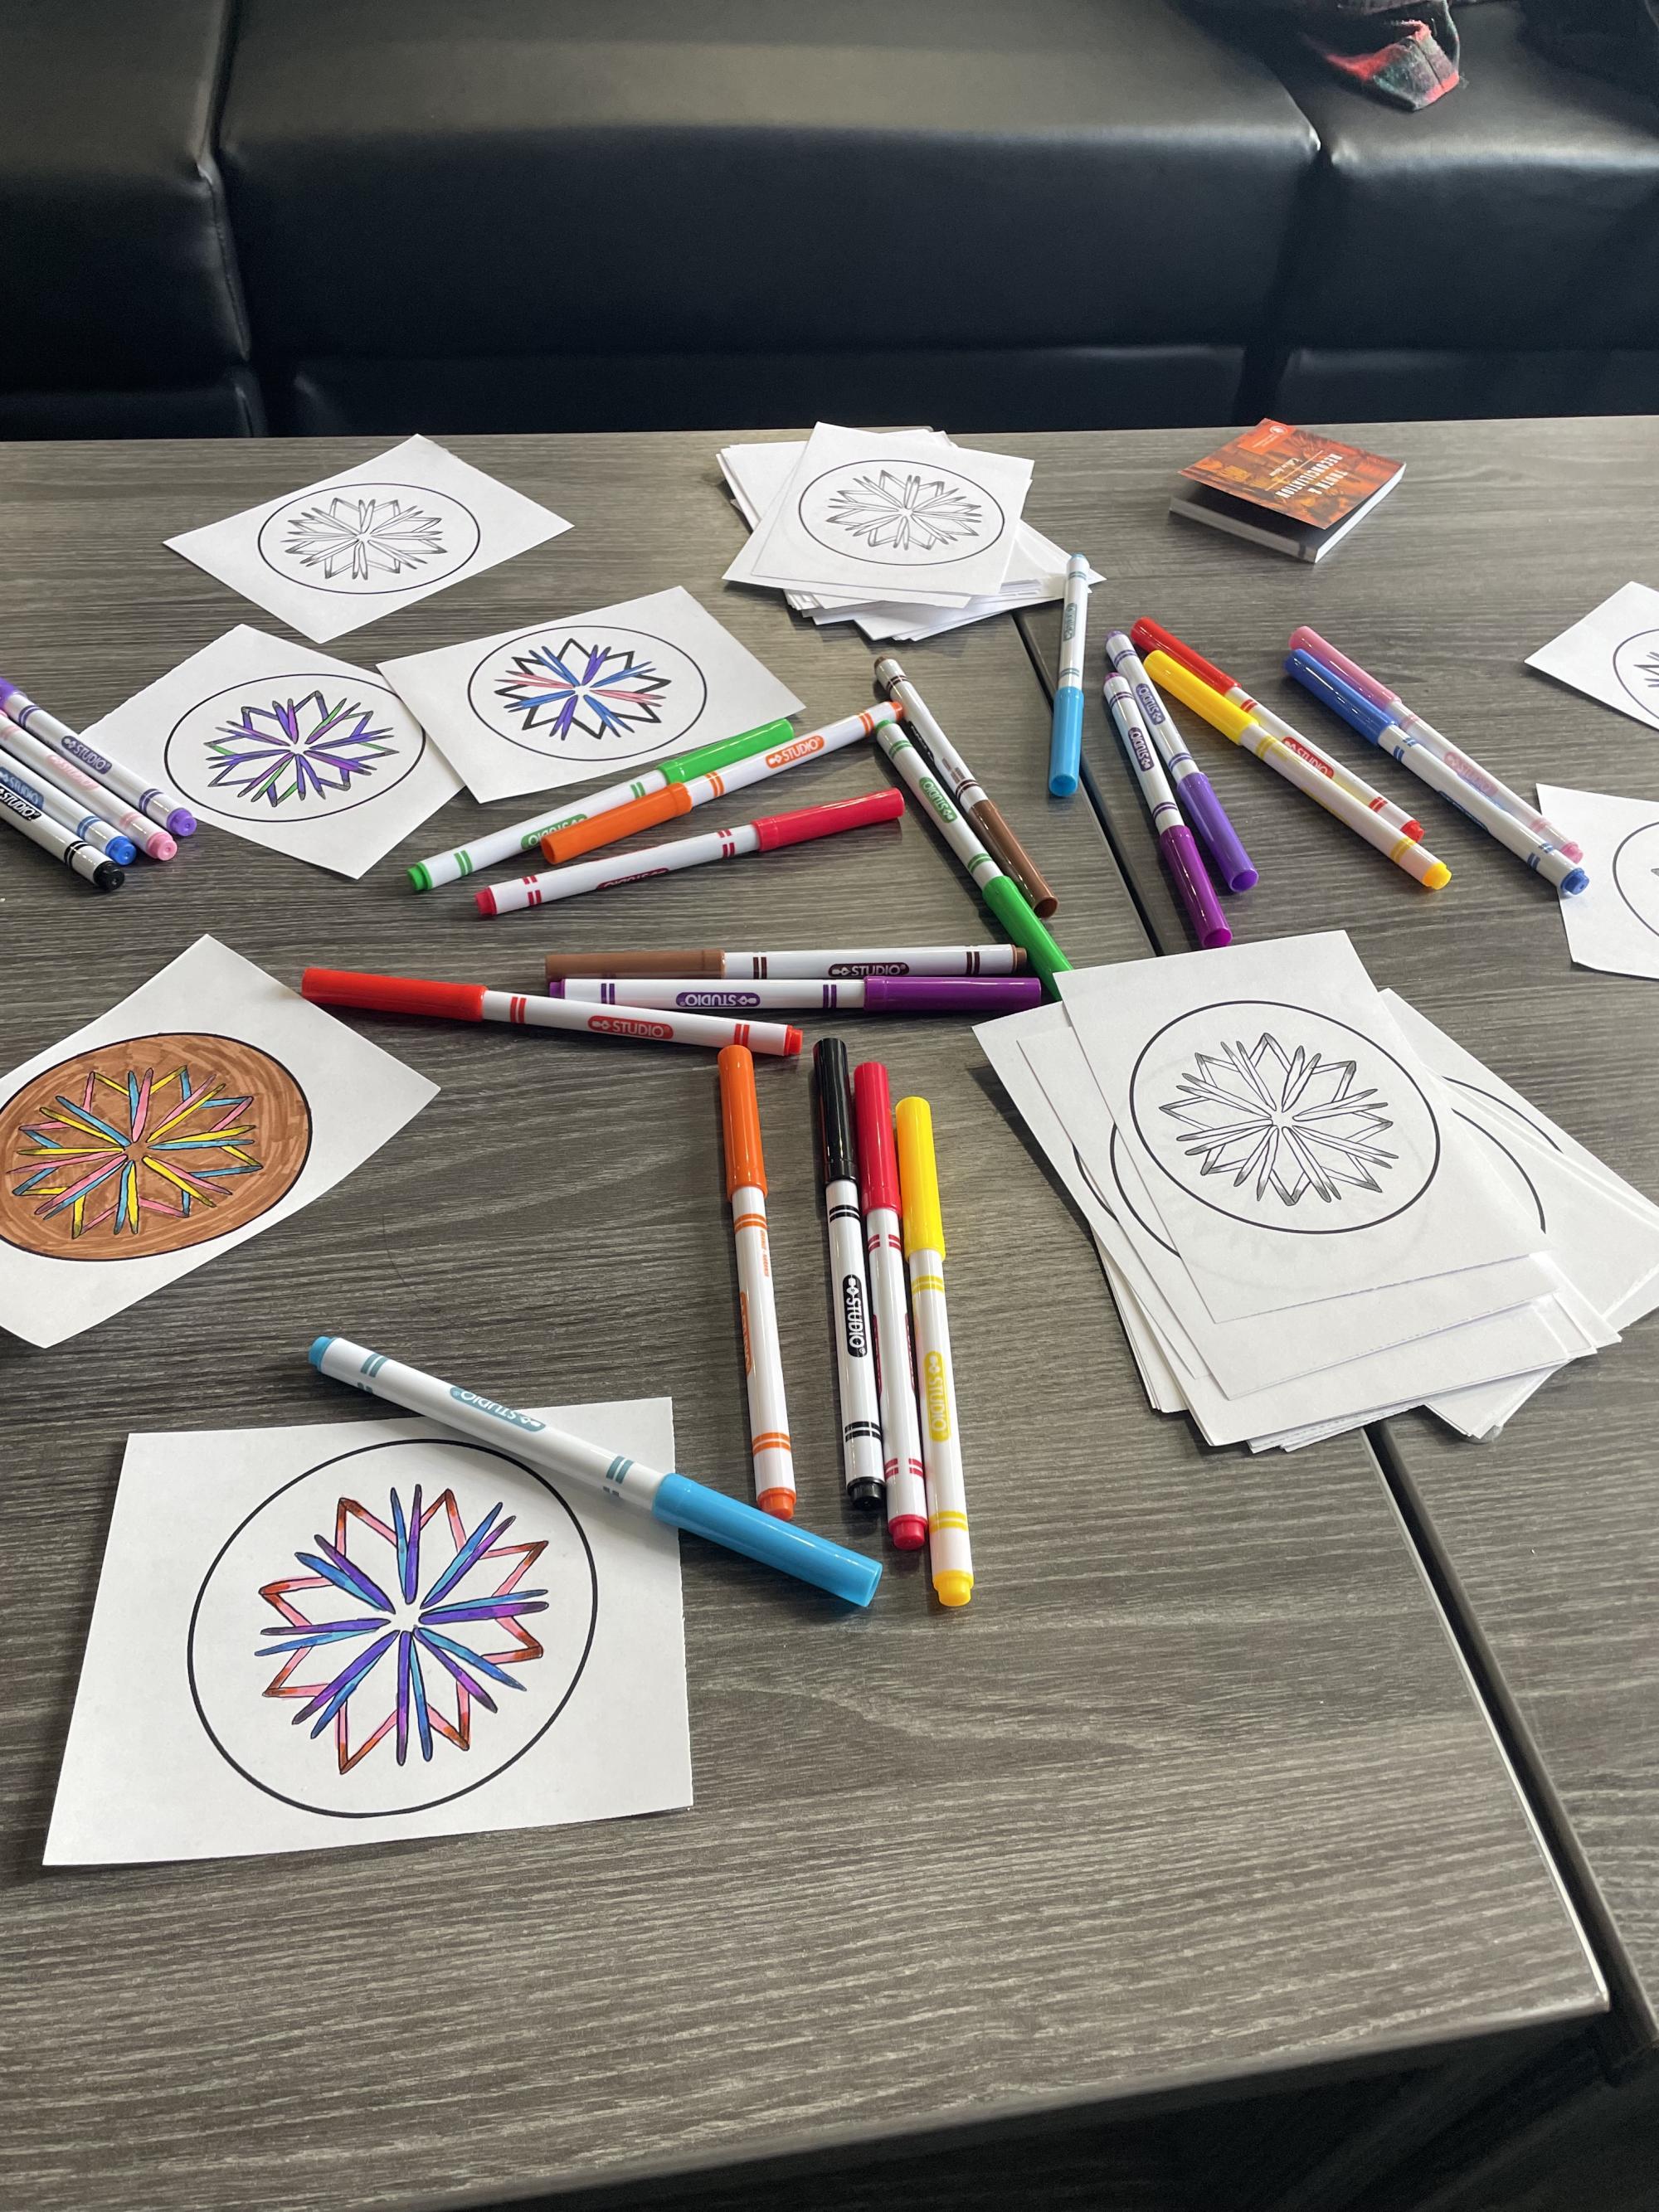 [ID: "Colouring pages of porcupine quill medallions depicting the Mi'kmaw 8-point star."]